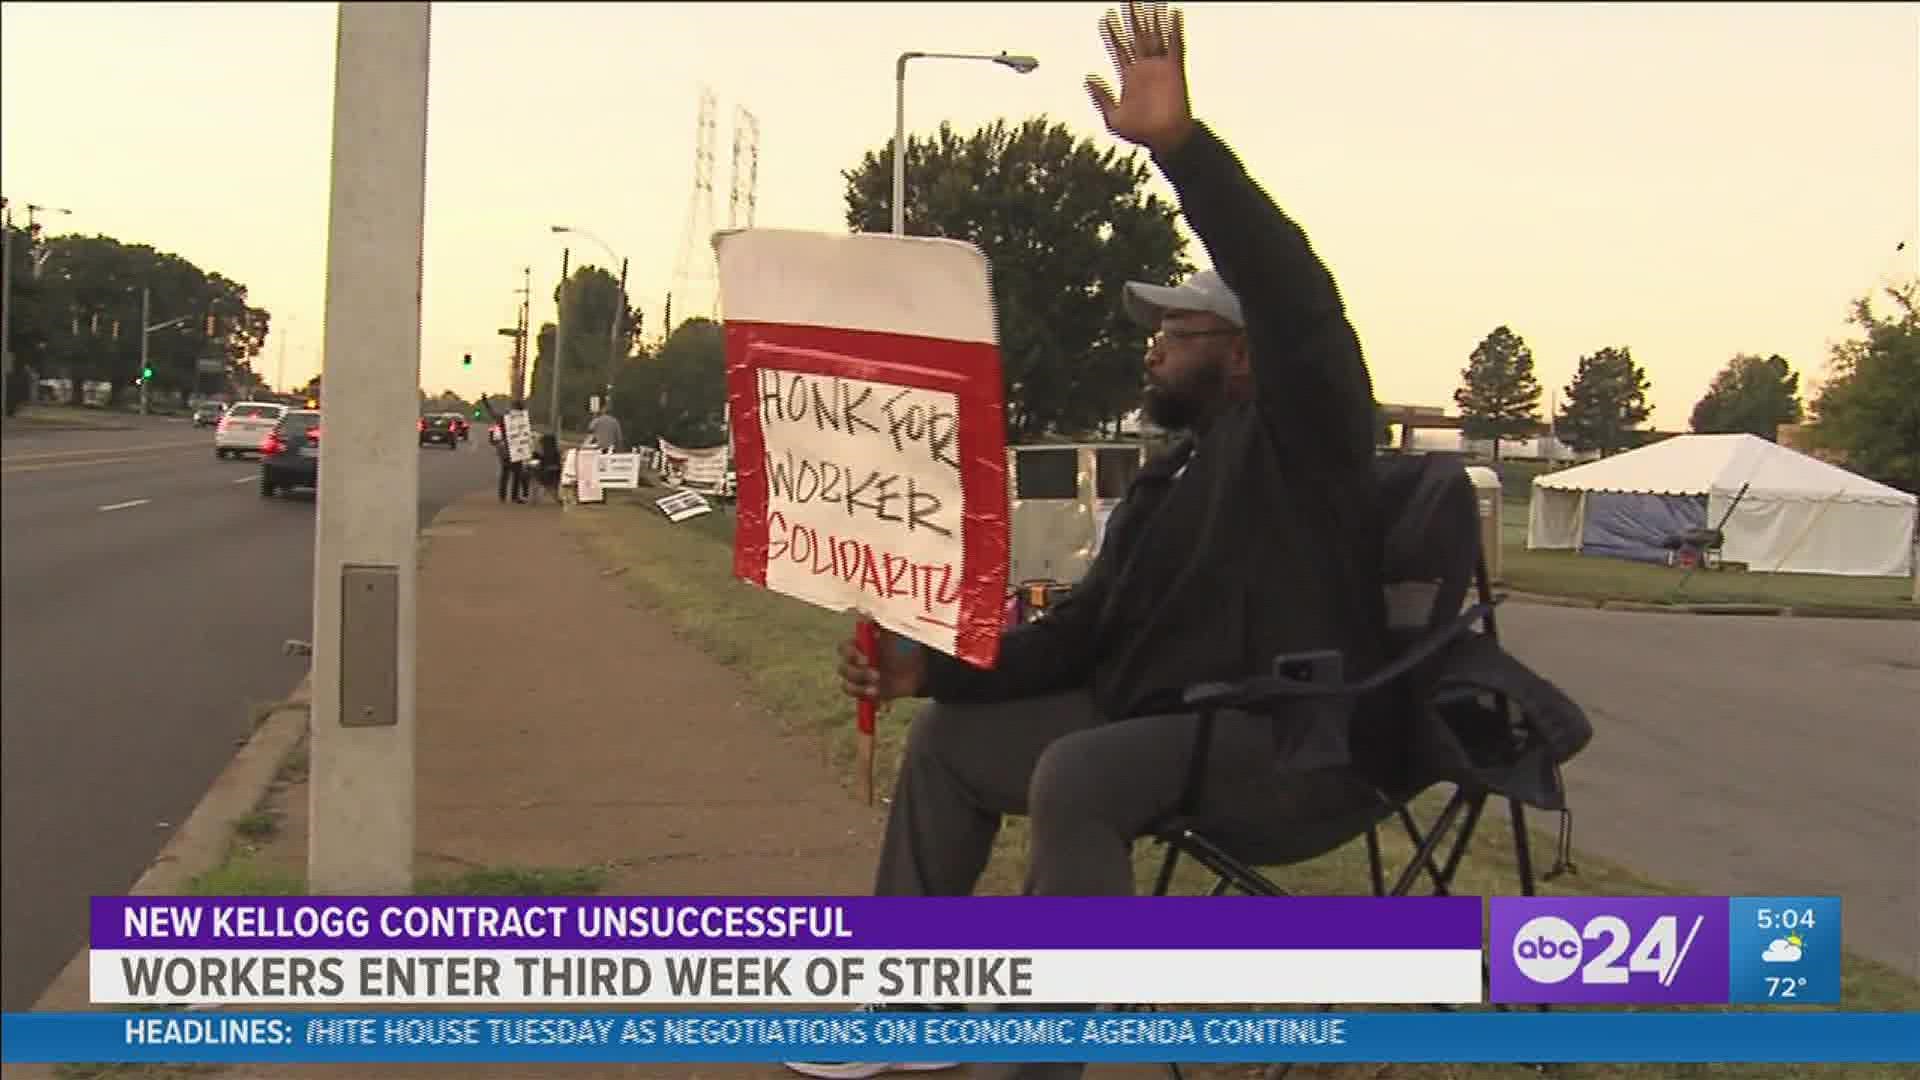 The strike came after the union says negotiations for a new national-level contract were unsuccessful.